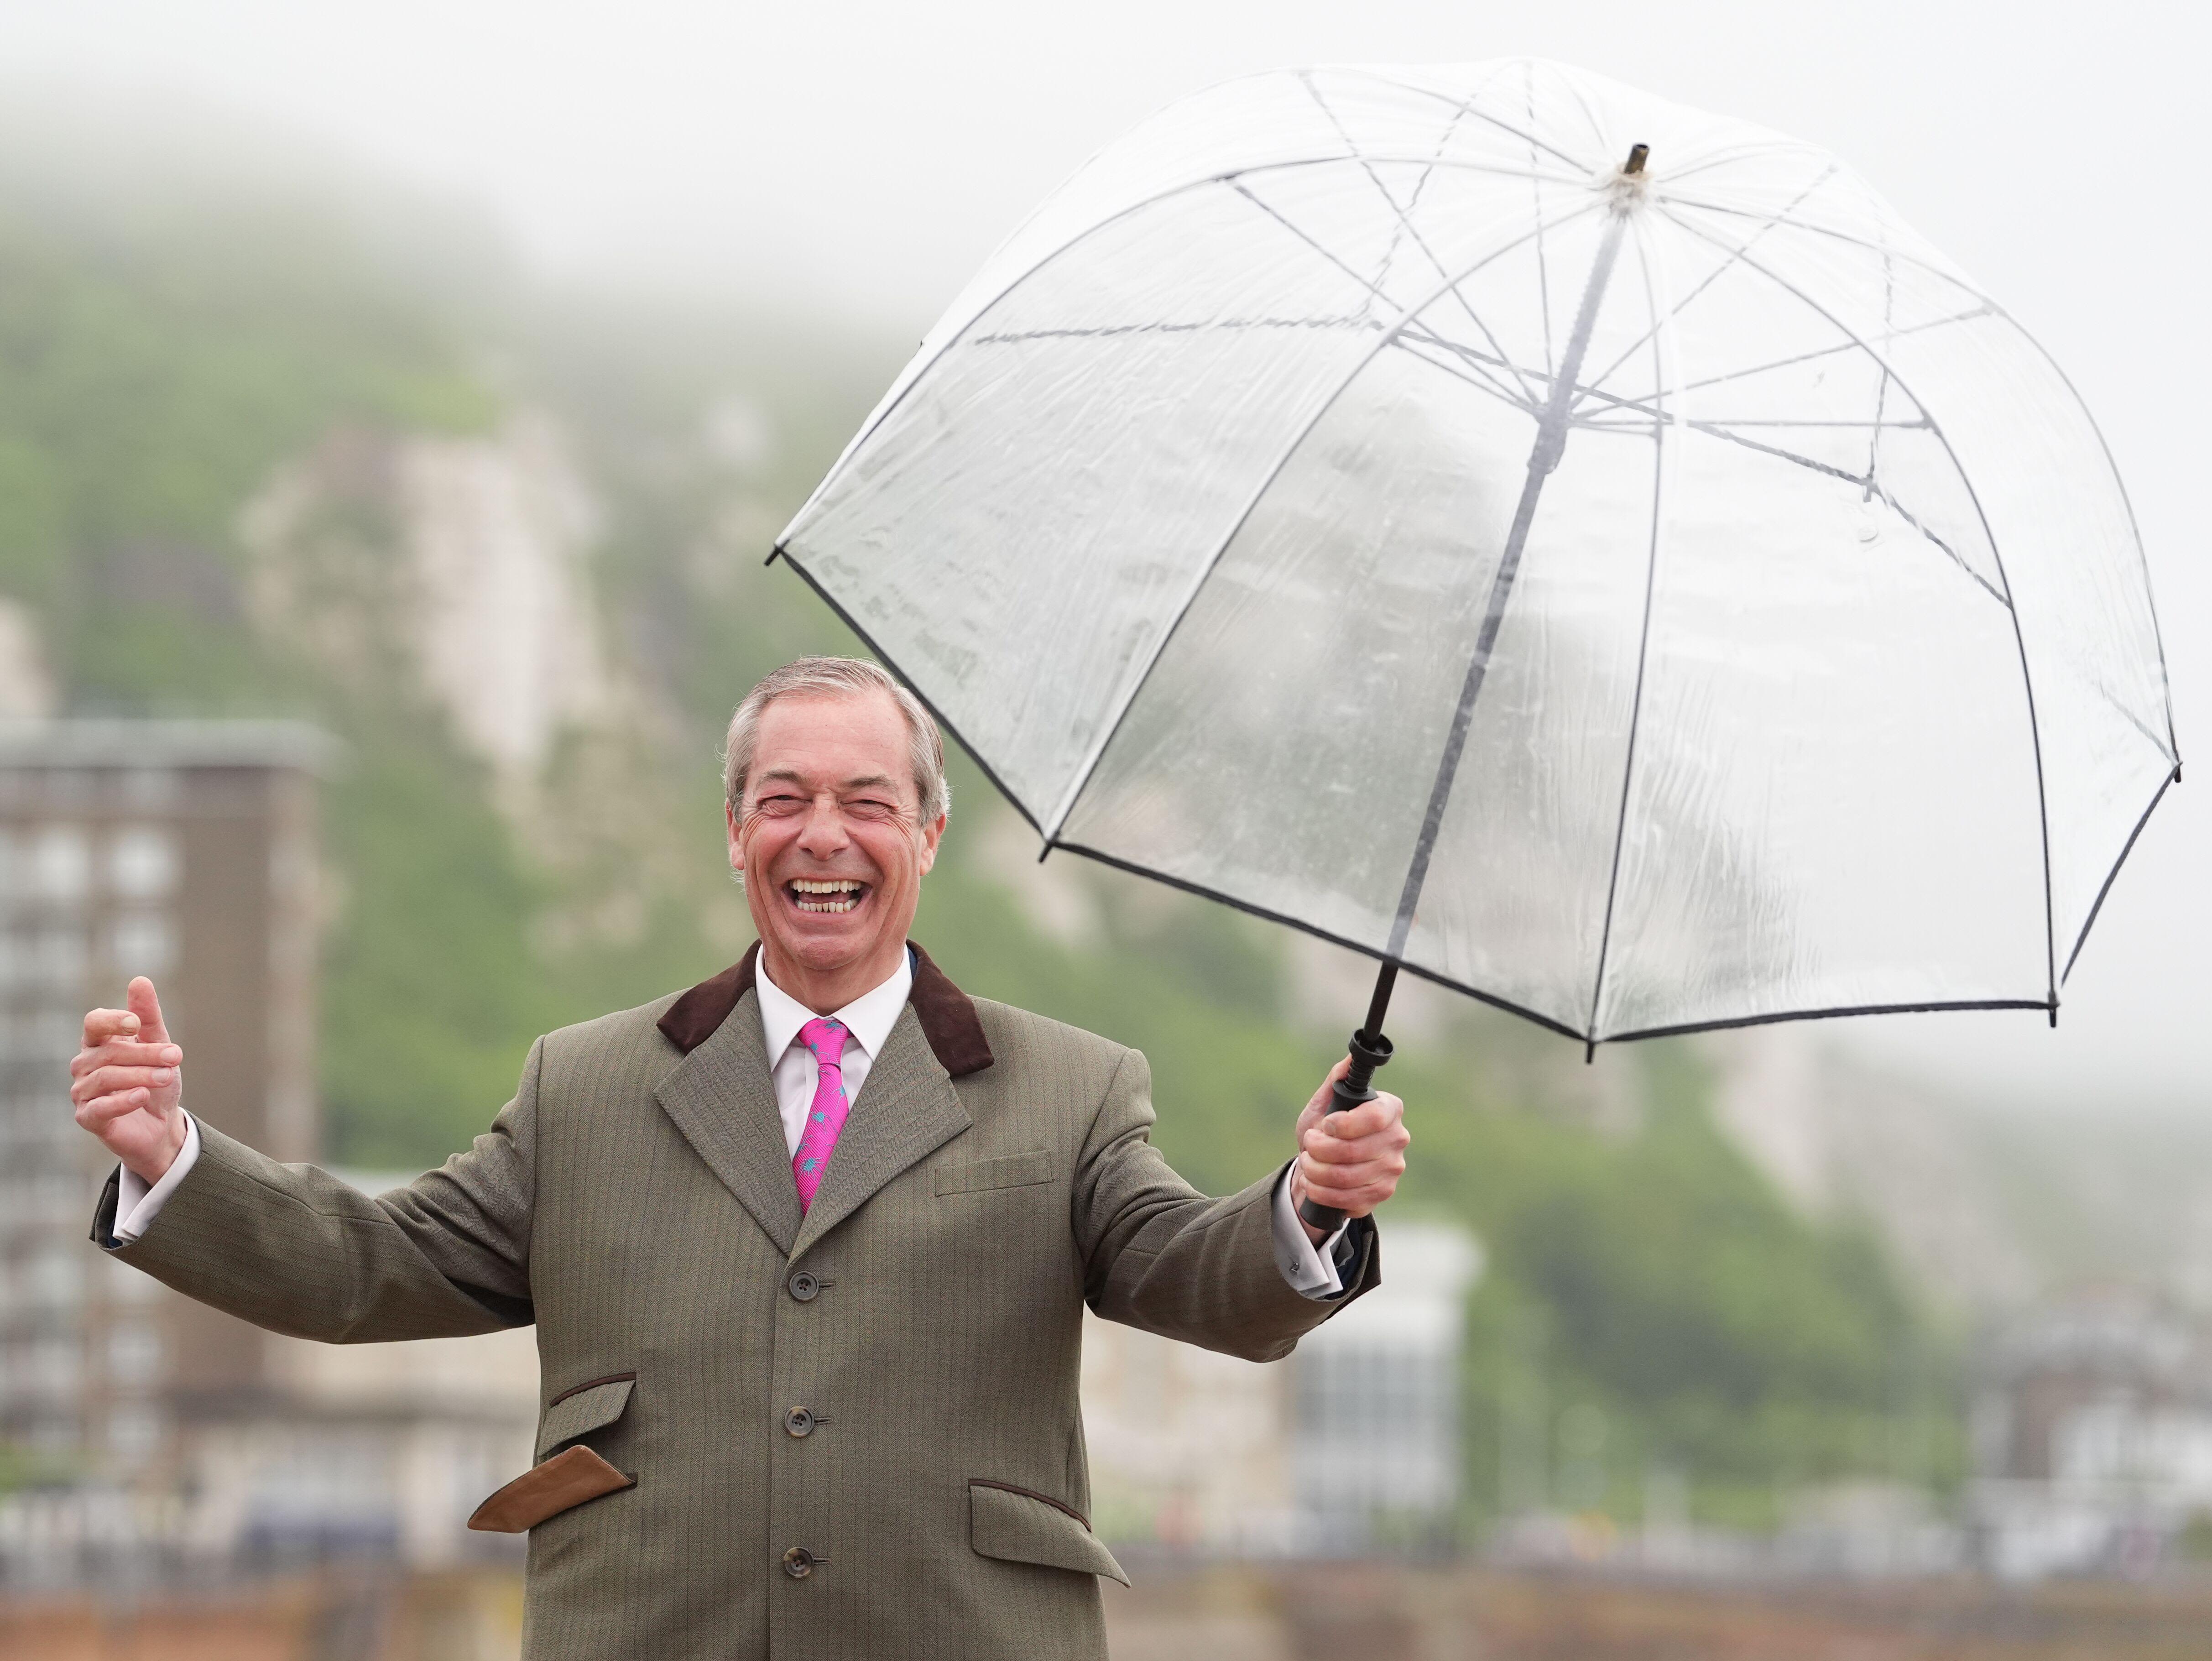 Will Nigel Farage's Reform party win any seats in the election?